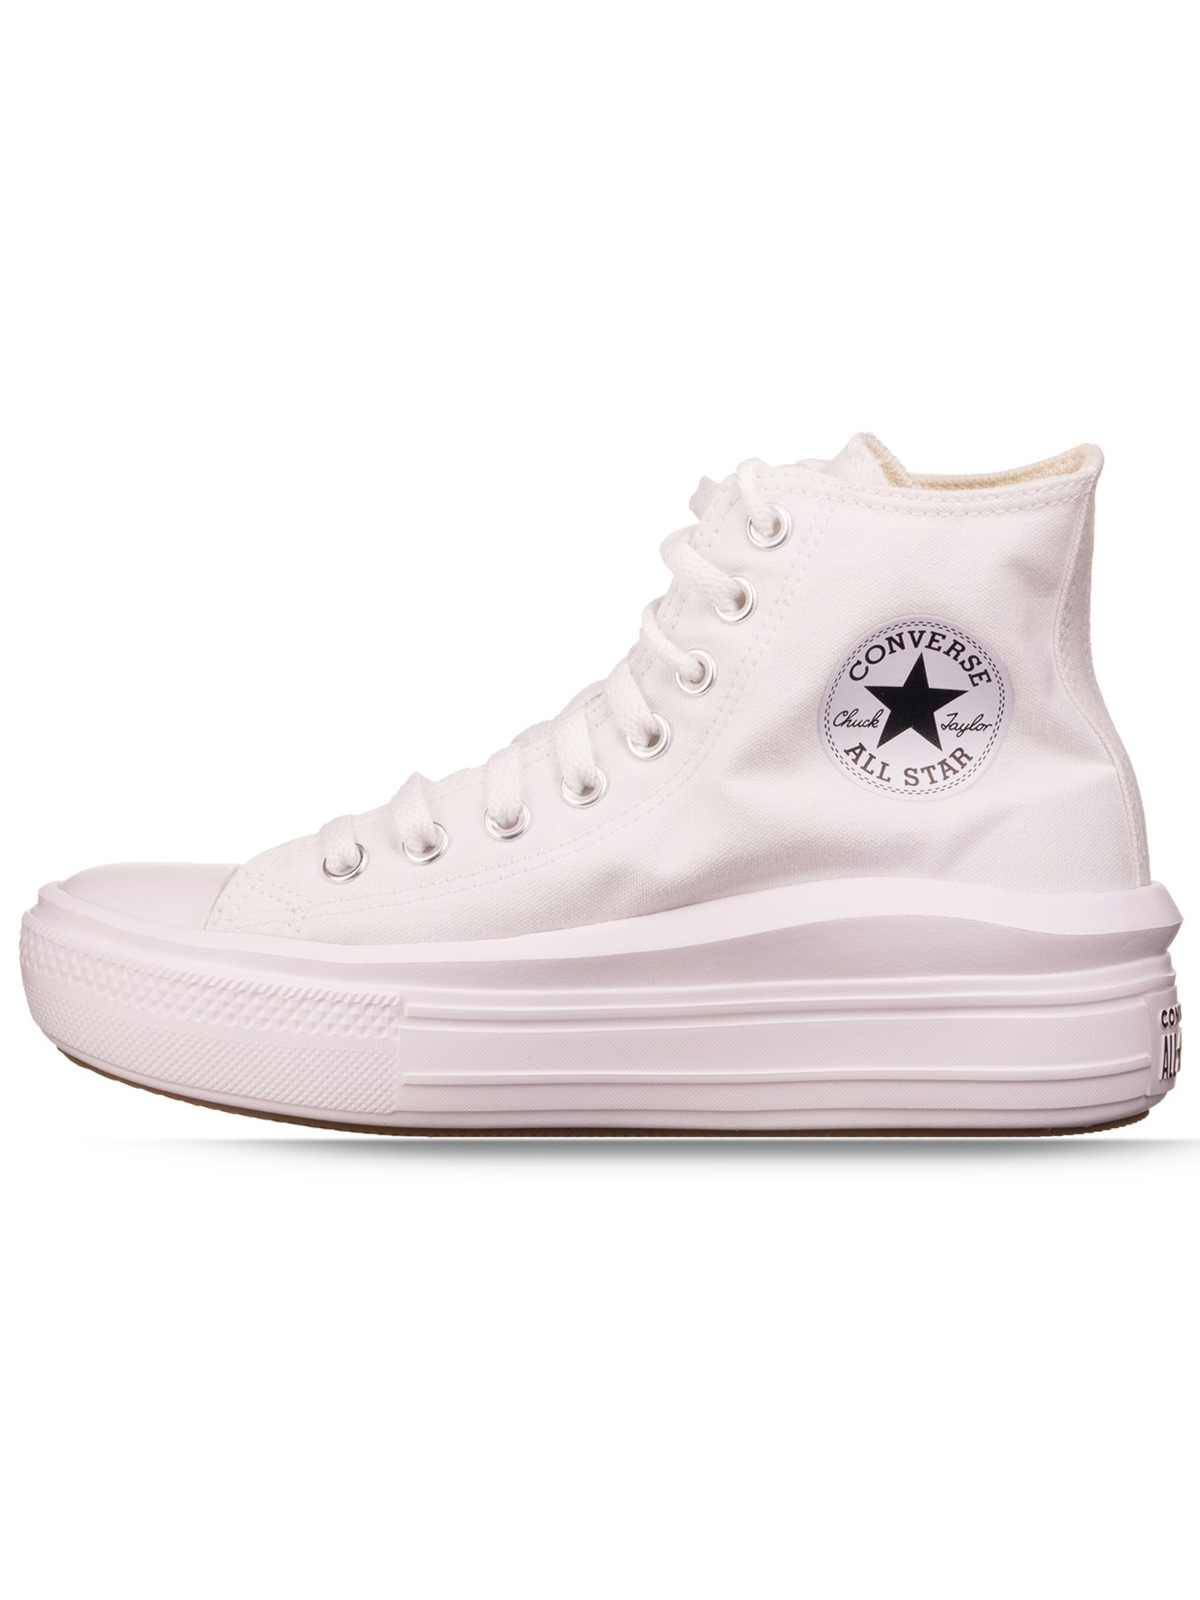   Converse | Chuck Taylor All Star Move | Womens Shoes